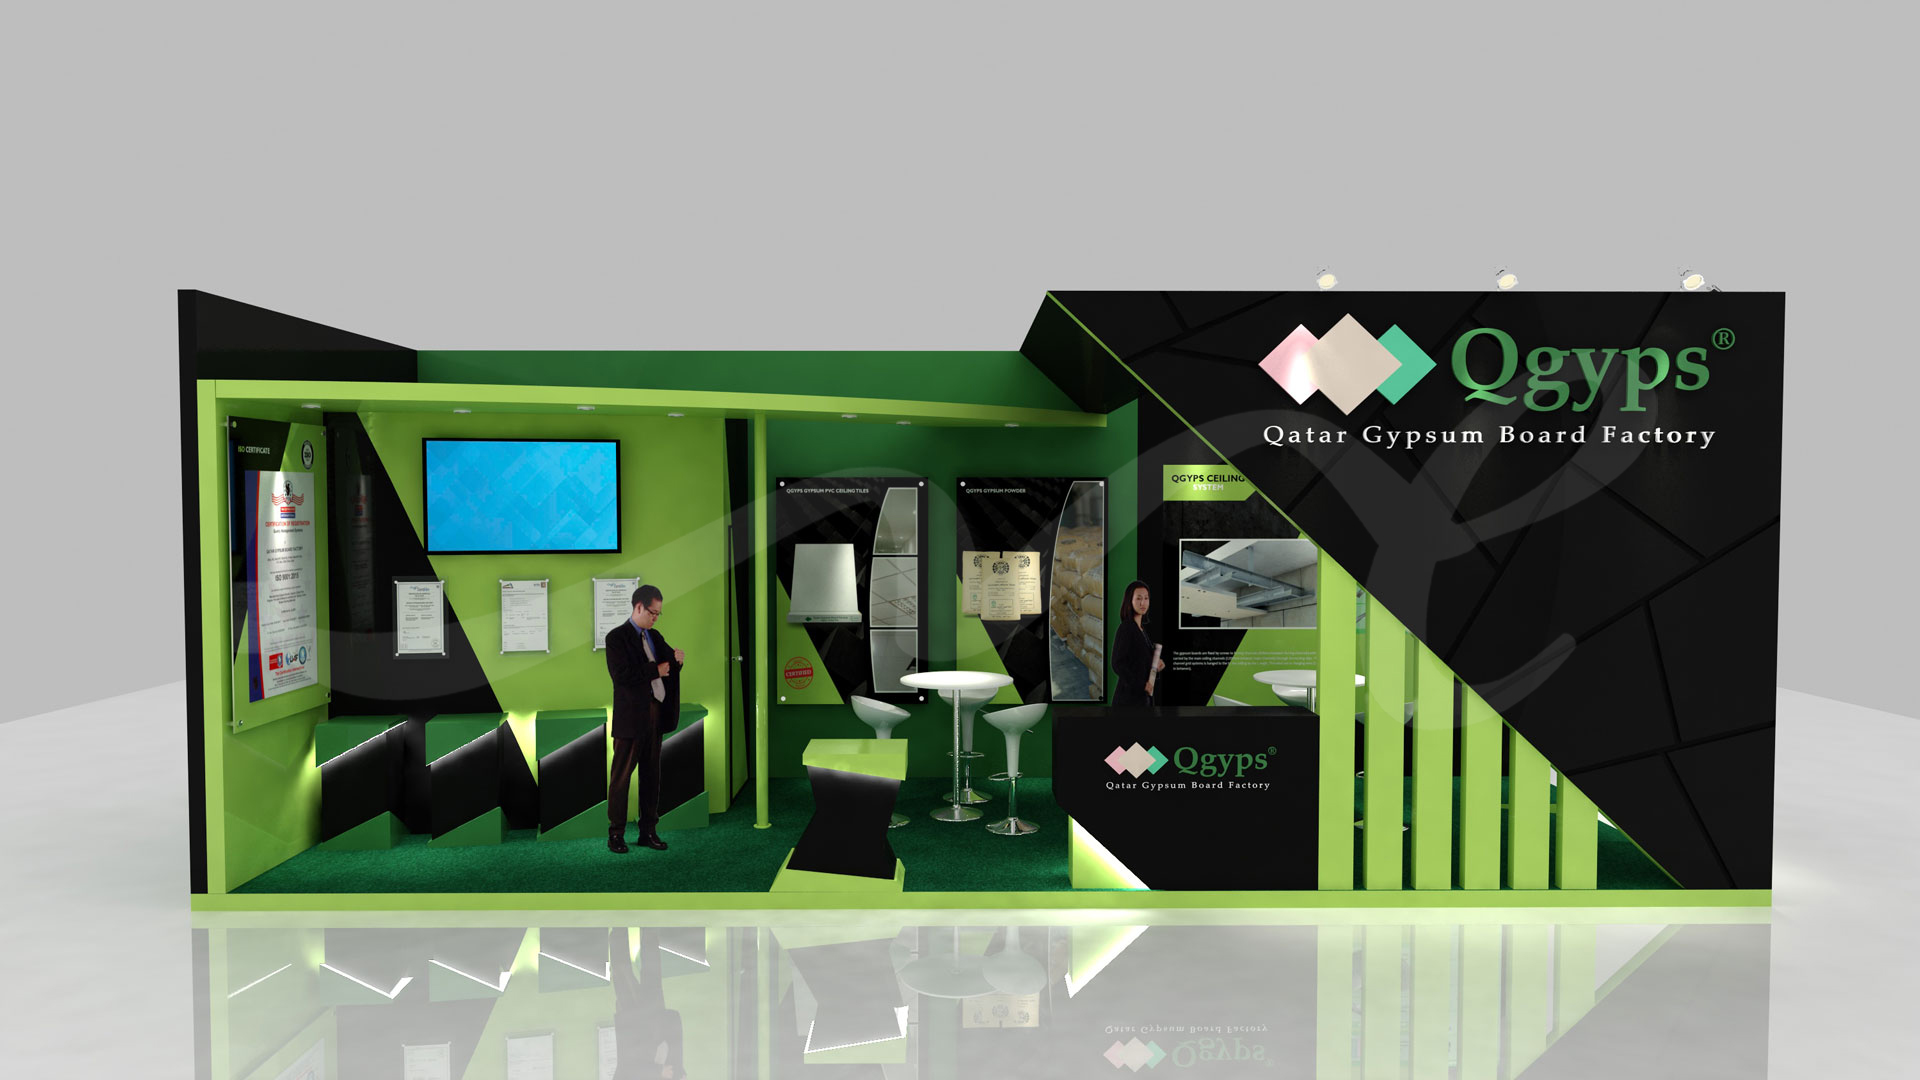 3D Design for Qatar Gypsum Board Factory stand by ME Visual